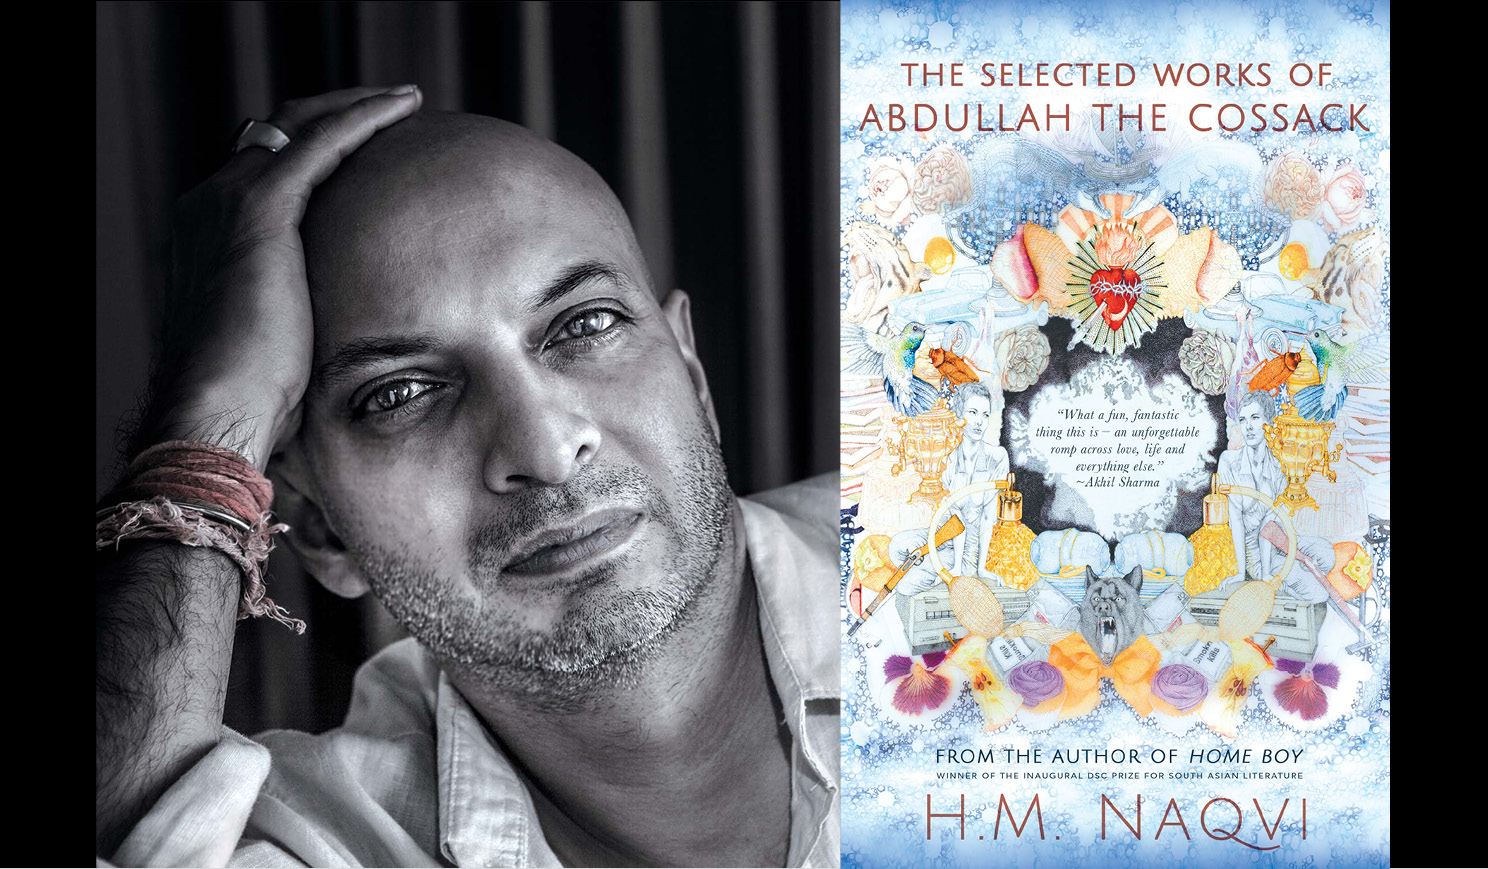 HM Naqvi's headshot alongside the cover of his book